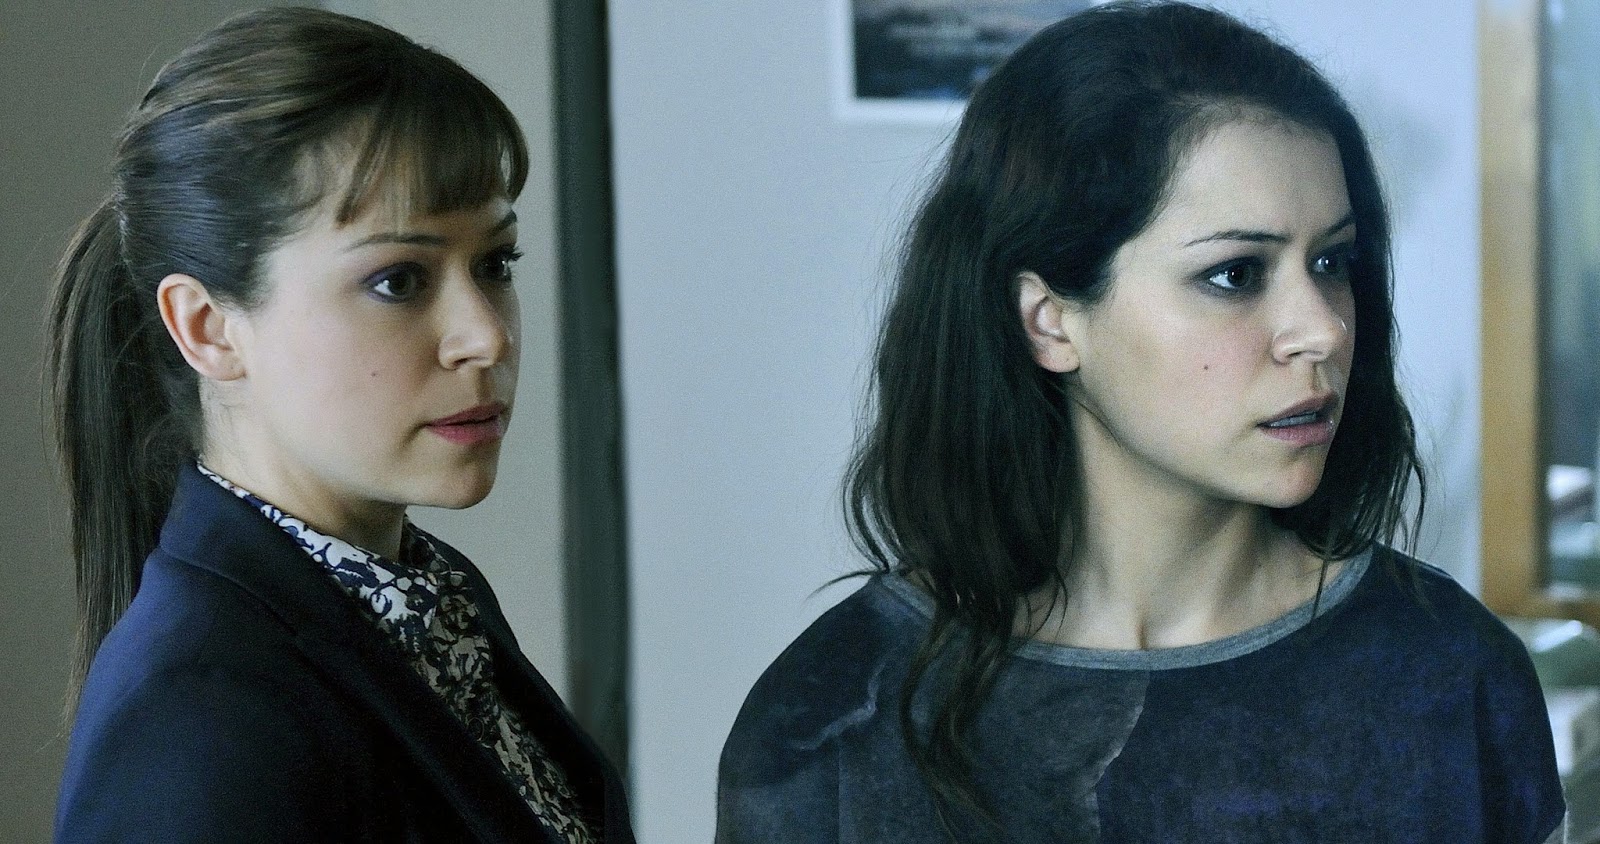 Orphan Black - Knowledge of Causes, and Secret Motion of Things - Review: "Alison's Wonderland"